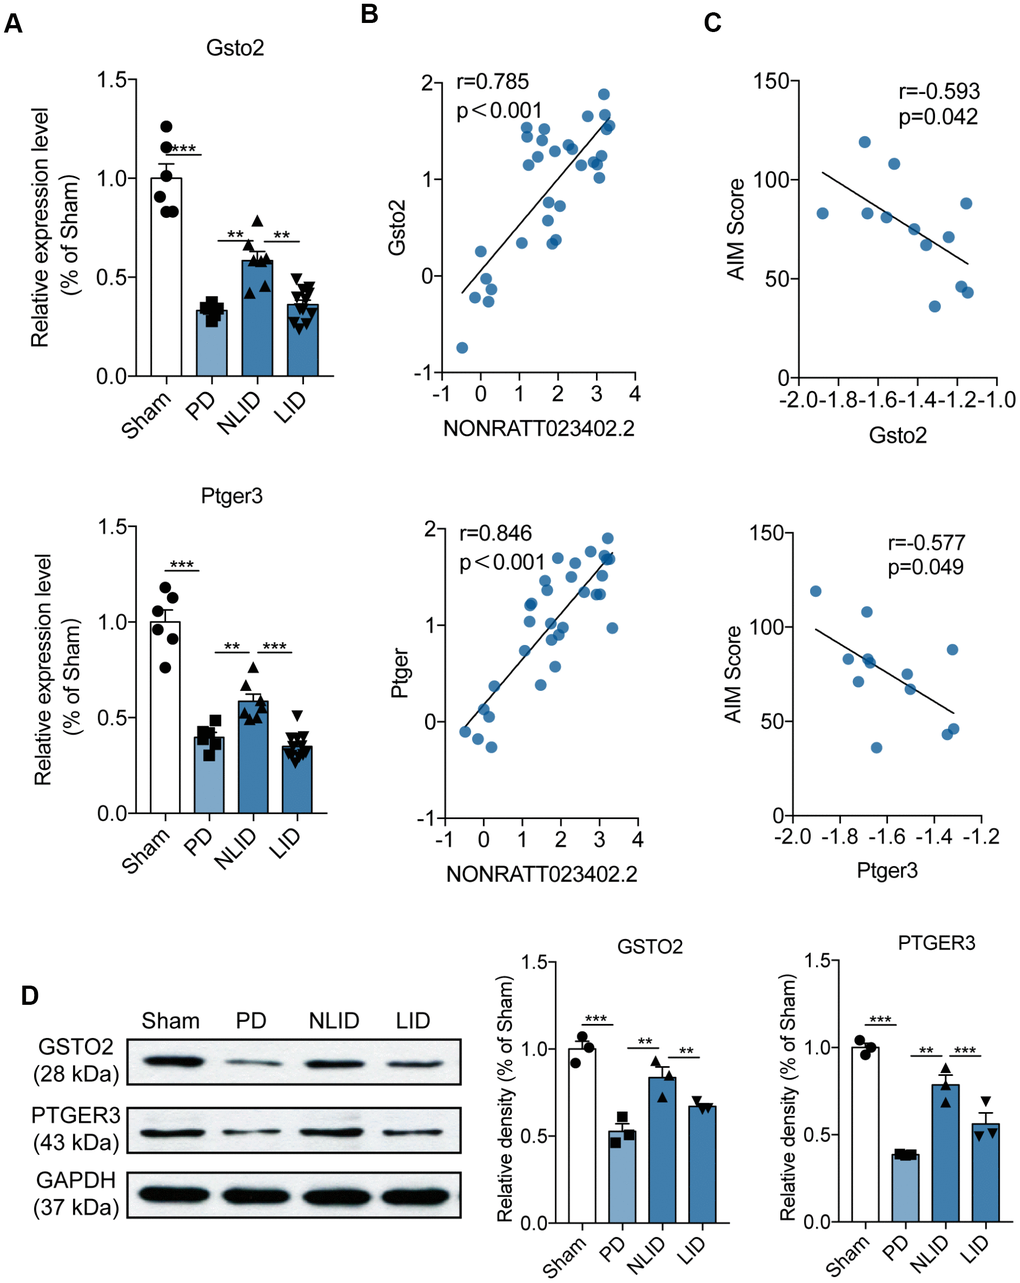 Expression profiles of the potential target genes of lncRNA NONRATT023402.2. (A) Gsto2 and Ptger3 expression determined by qRT-PCR in the striatum of PD and LID rats and their corresponding controls (n = 6–11). (B) Correlation between NONRATT023402.2 and Gsto2 or Ptger3 expression levels in the striatum of PD and LID rats and their corresponding controls (n = 11). (C) Correlation between Gsto2 or Ptger3 expression in the striatum of LID rats and AIM score (n = 11). (D). GSTO2 and PTGER3 protein levels in the striatum of PD and LID rats and their corresponding controls (n = 3), as determined by western blotting. The intensity of protein bands was quantified by densitometry and normalized to that of GAPDH. Data represent mean ± SEM. **P 